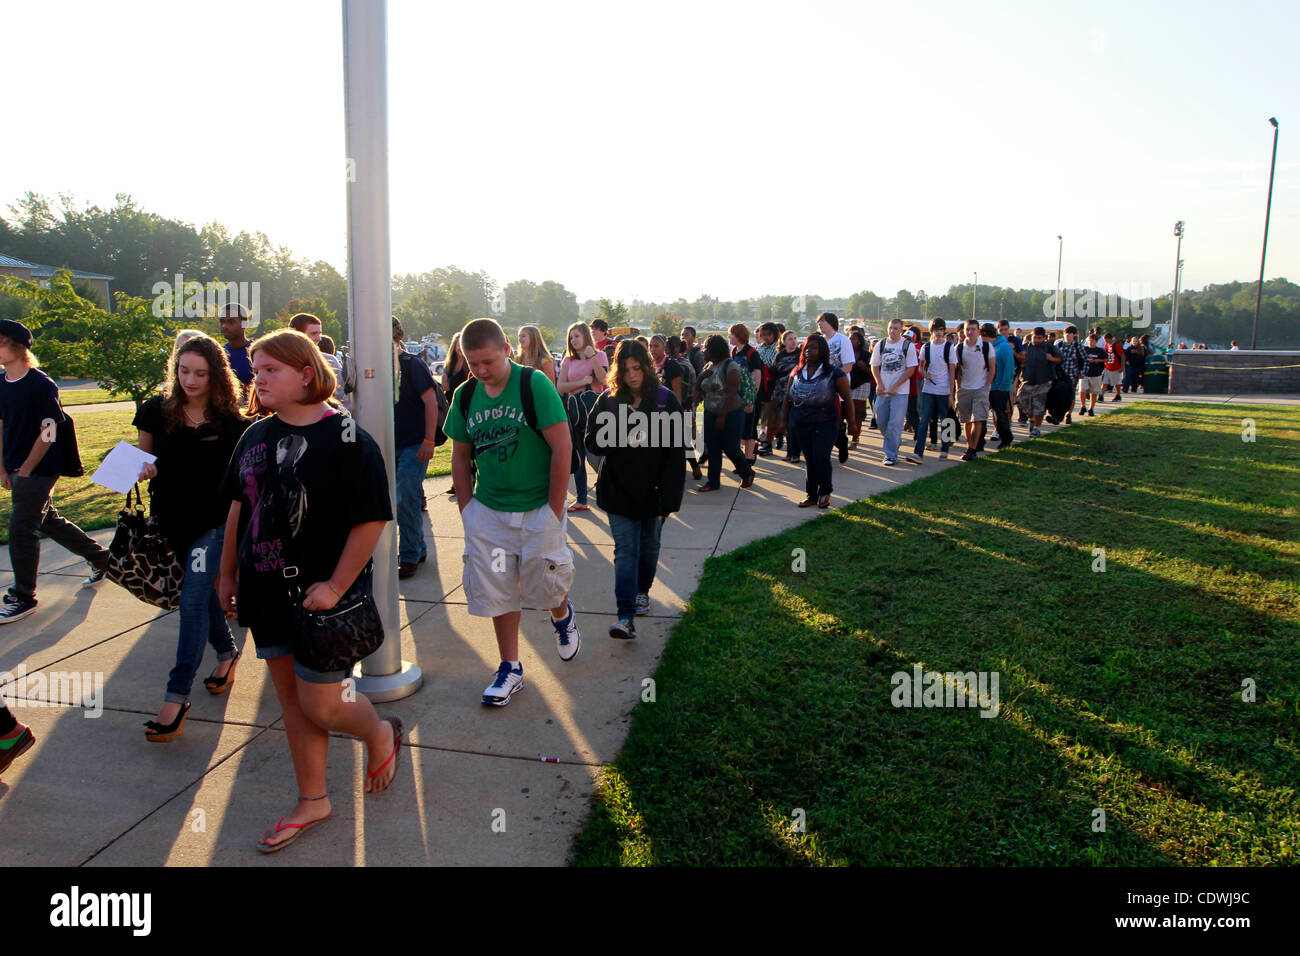 Sept. 12, 2011 - Louisa, Virginia - USA; High school students in Louisa County attend the first day of classes at Middle School after a 5.8 earthquake last month left the high school uninhabitable. High school and middle school students will be alternating days at Louisa County Middle School. High s Stock Photo